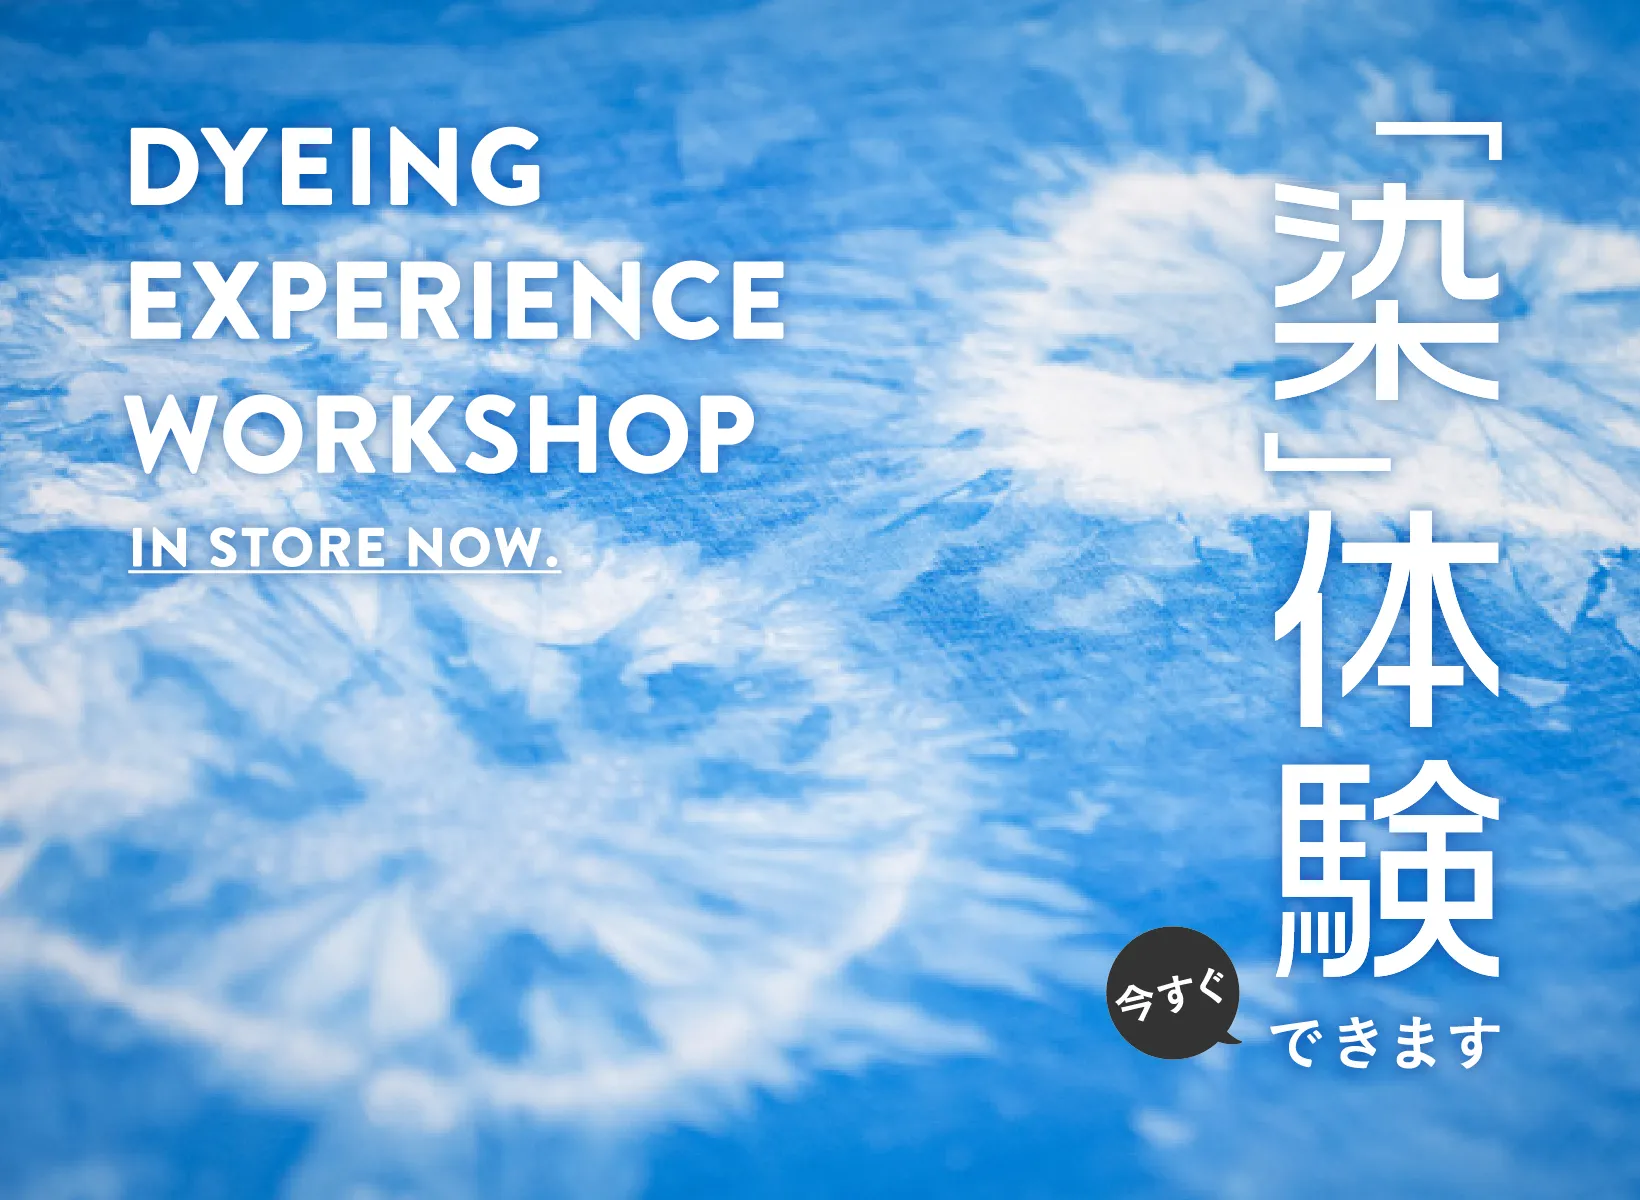 Day experience workshop in store now. 染め体験今すぐできます